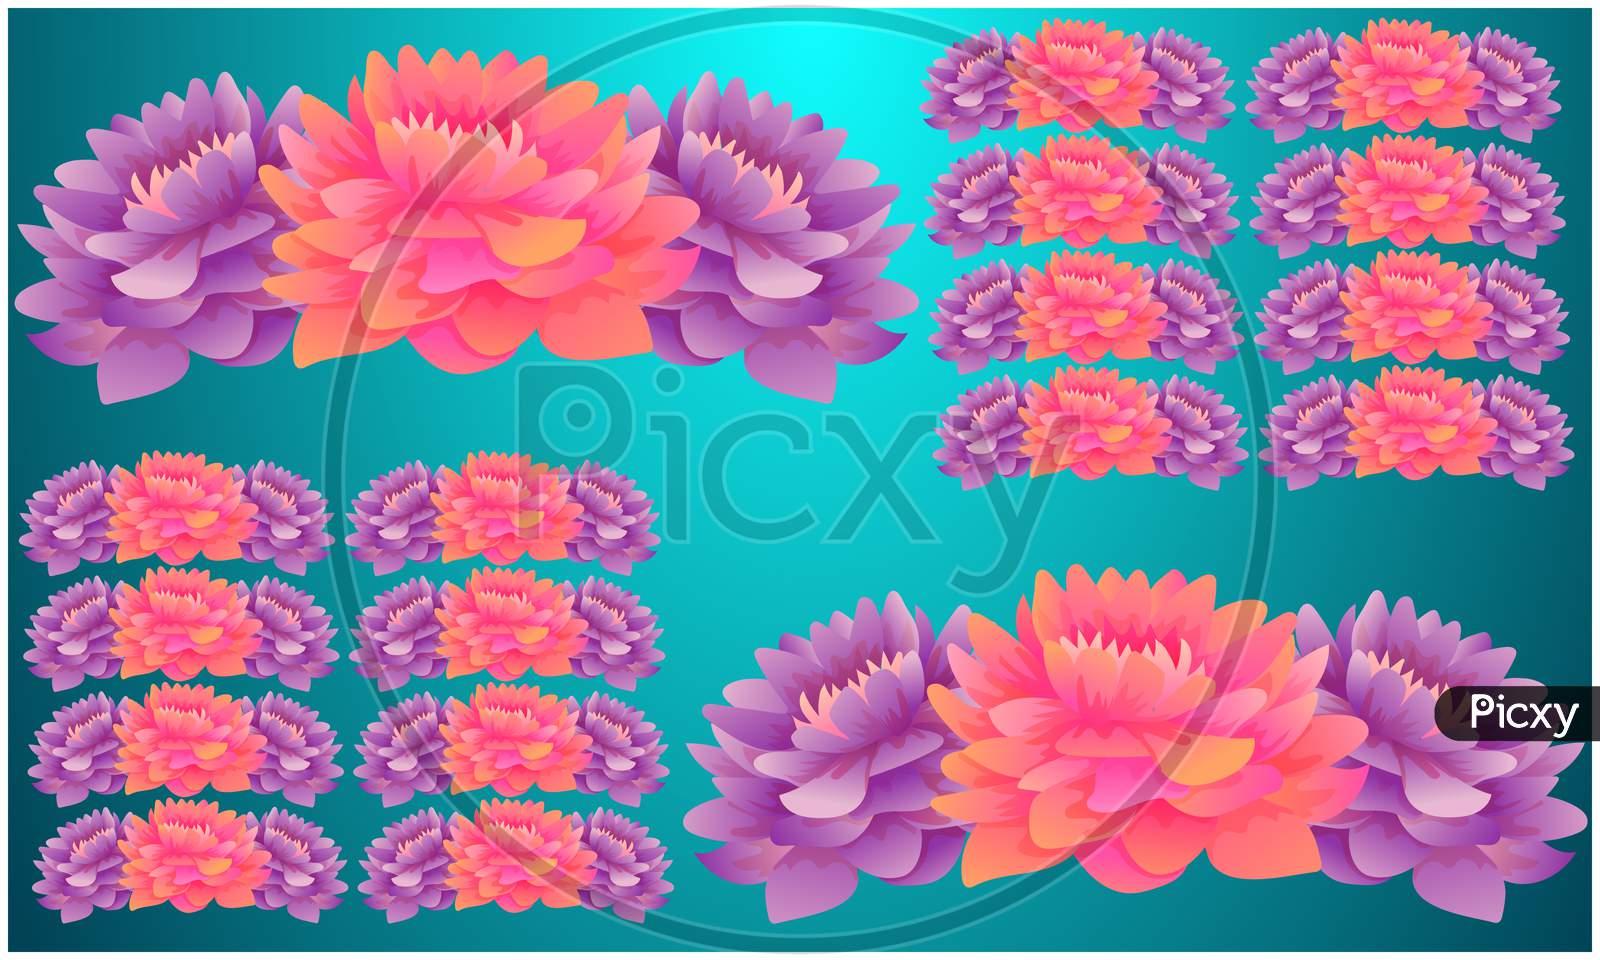 Digital Textile Design Of Flowers On Abstract Background